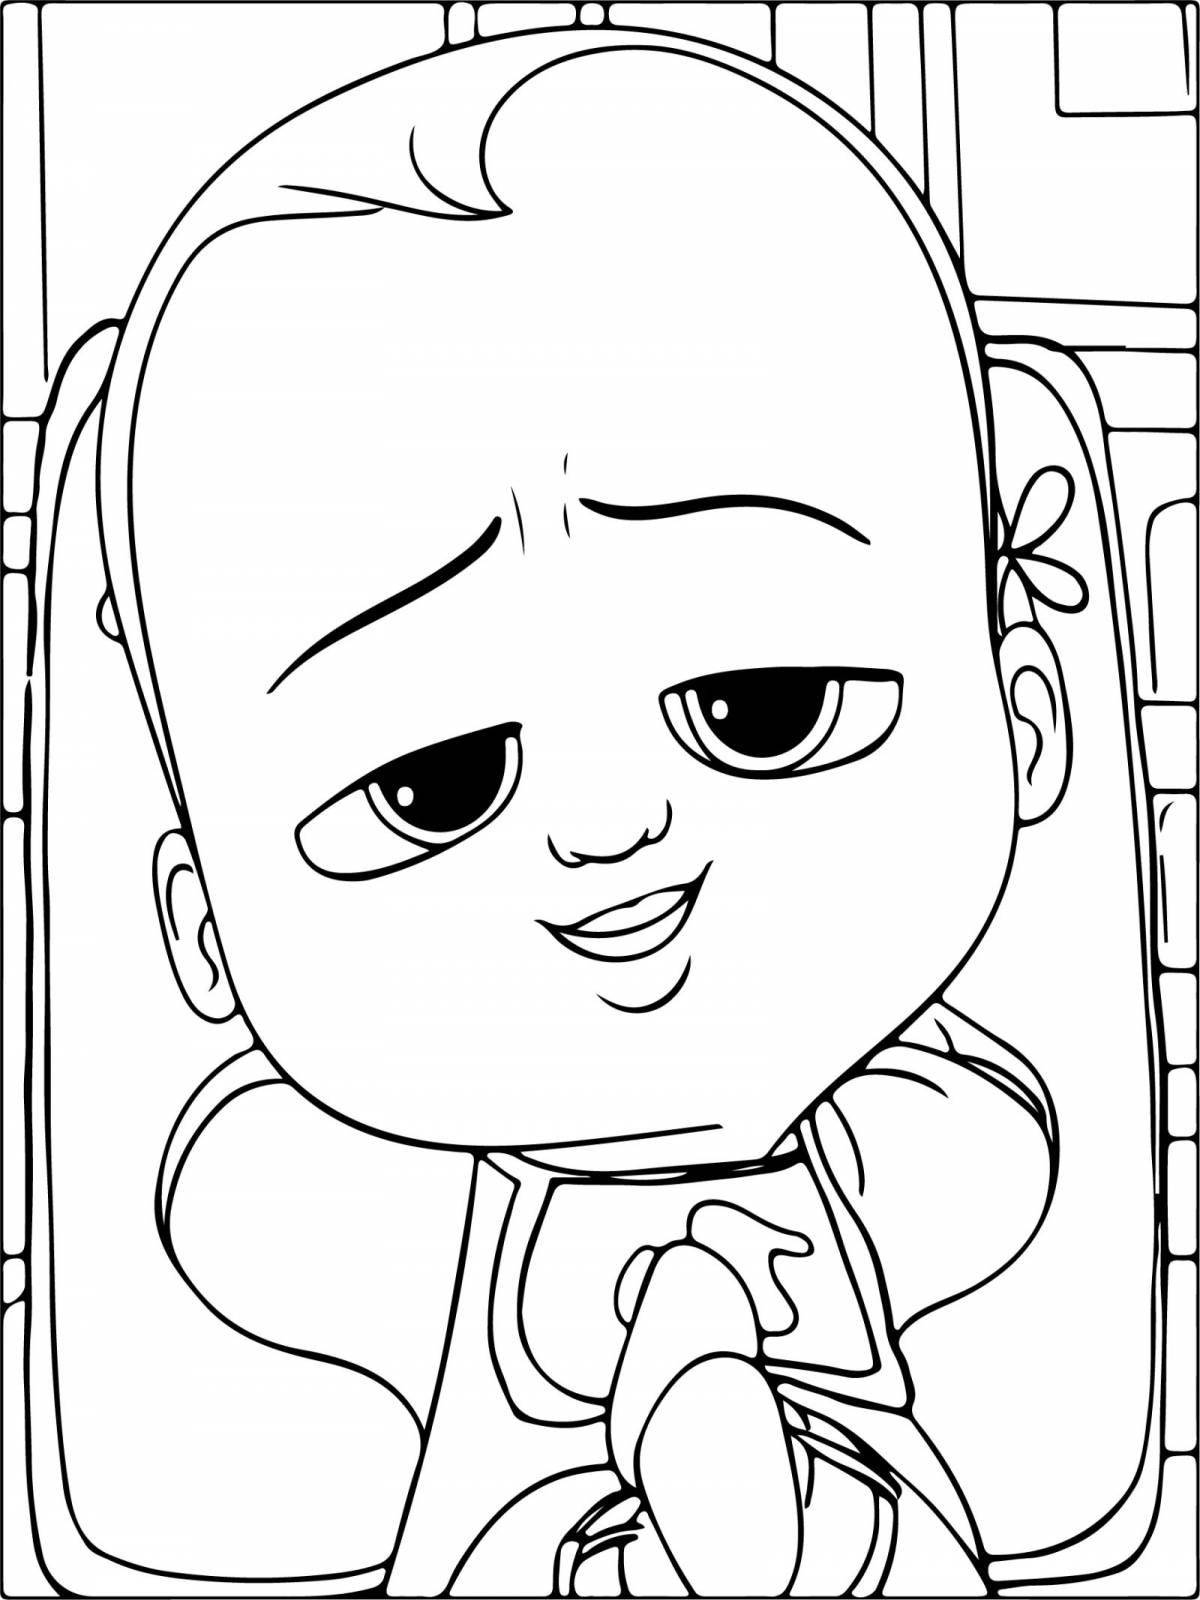 Animated baby boss coloring page